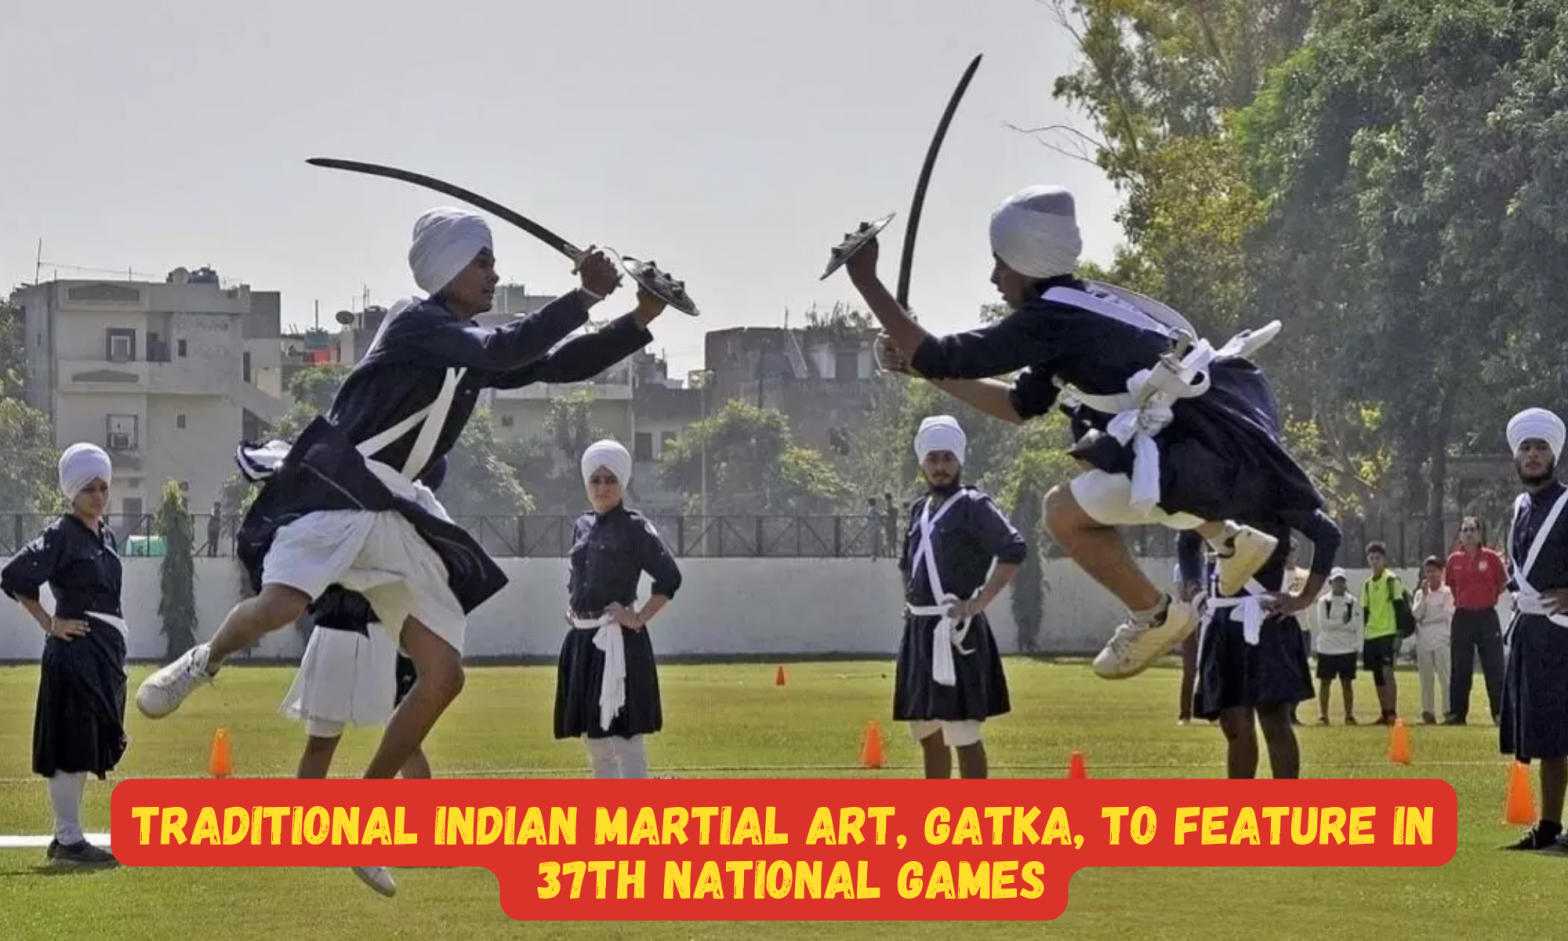 Gatka Martial Art to feature in 37th National Games